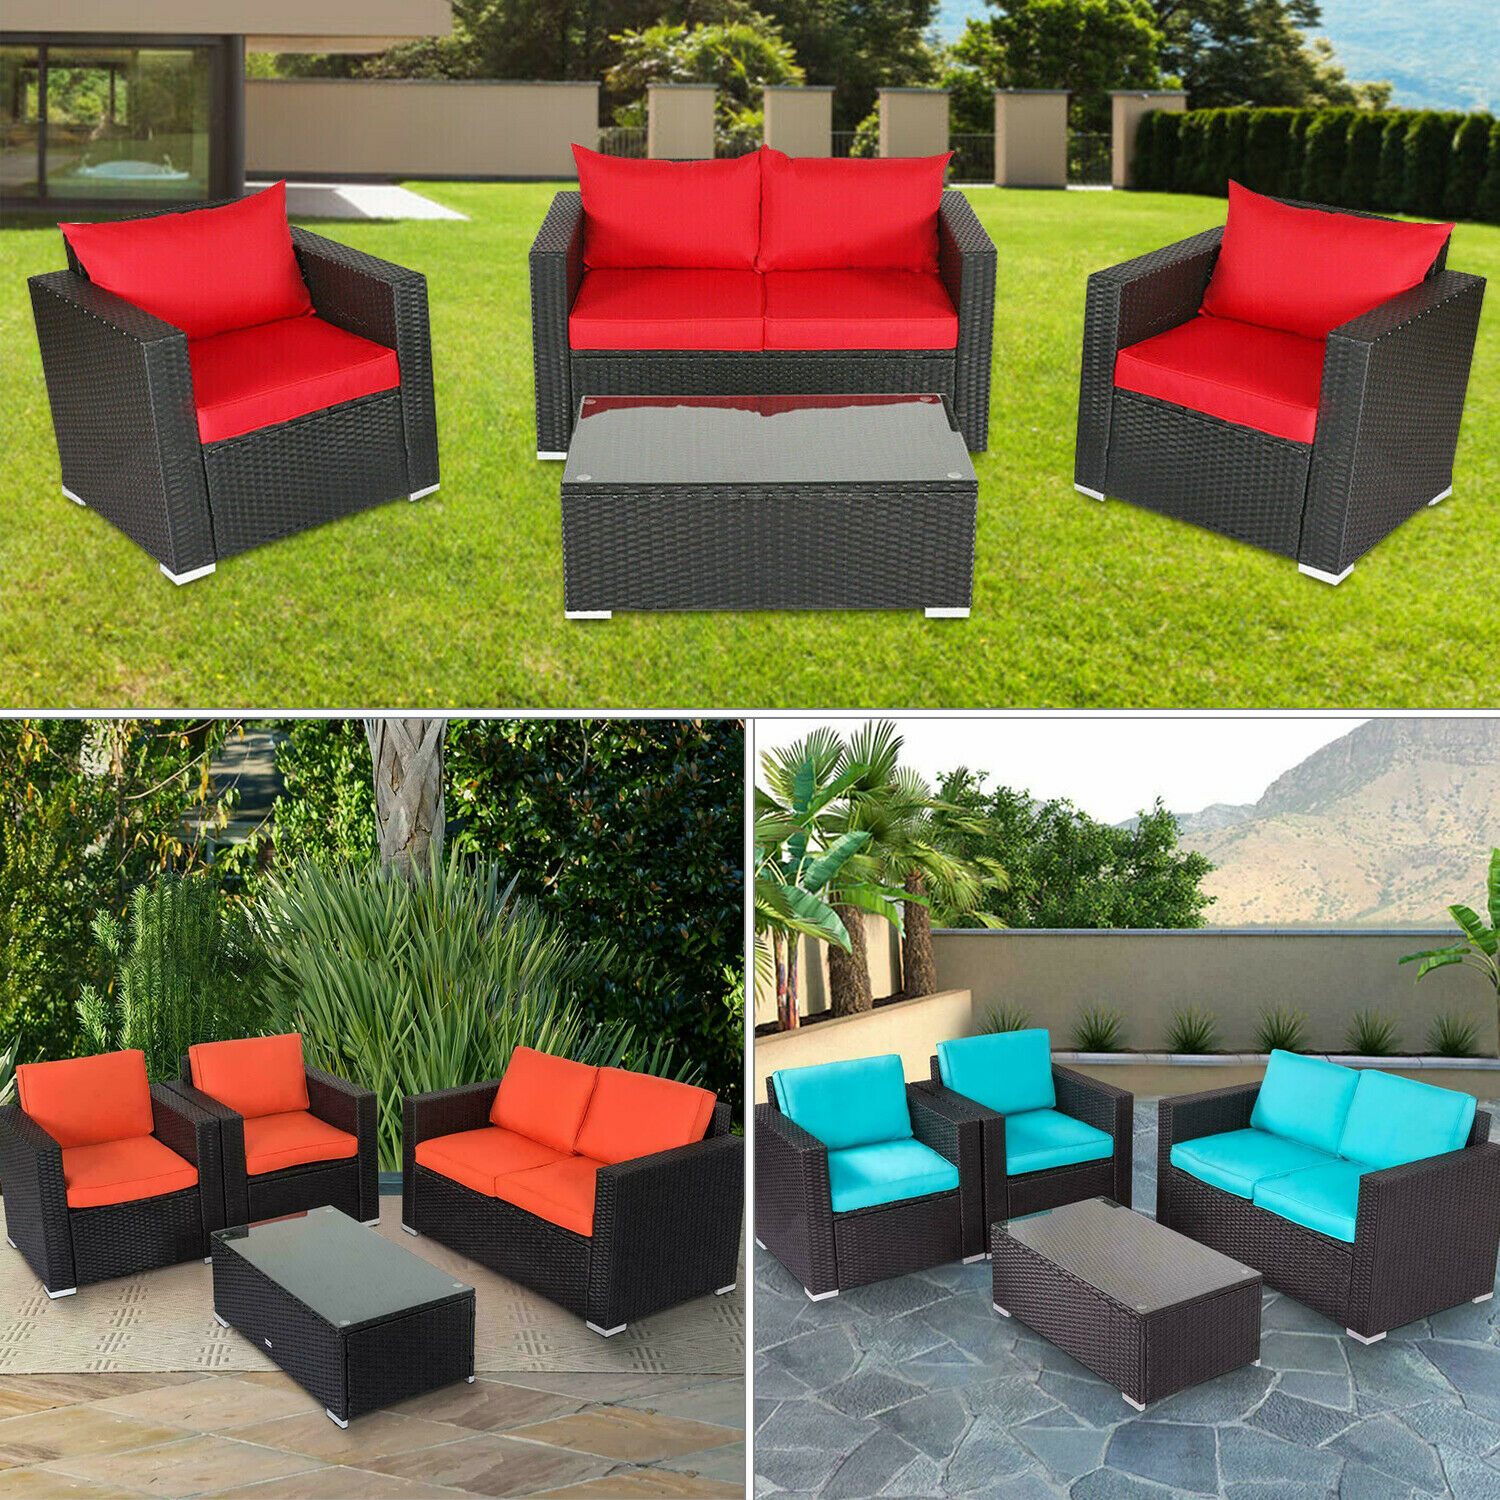 4 Pcs Patio Furniture Sectional Sofa Set Outdoor Rattan Wicker Cushioned Couch